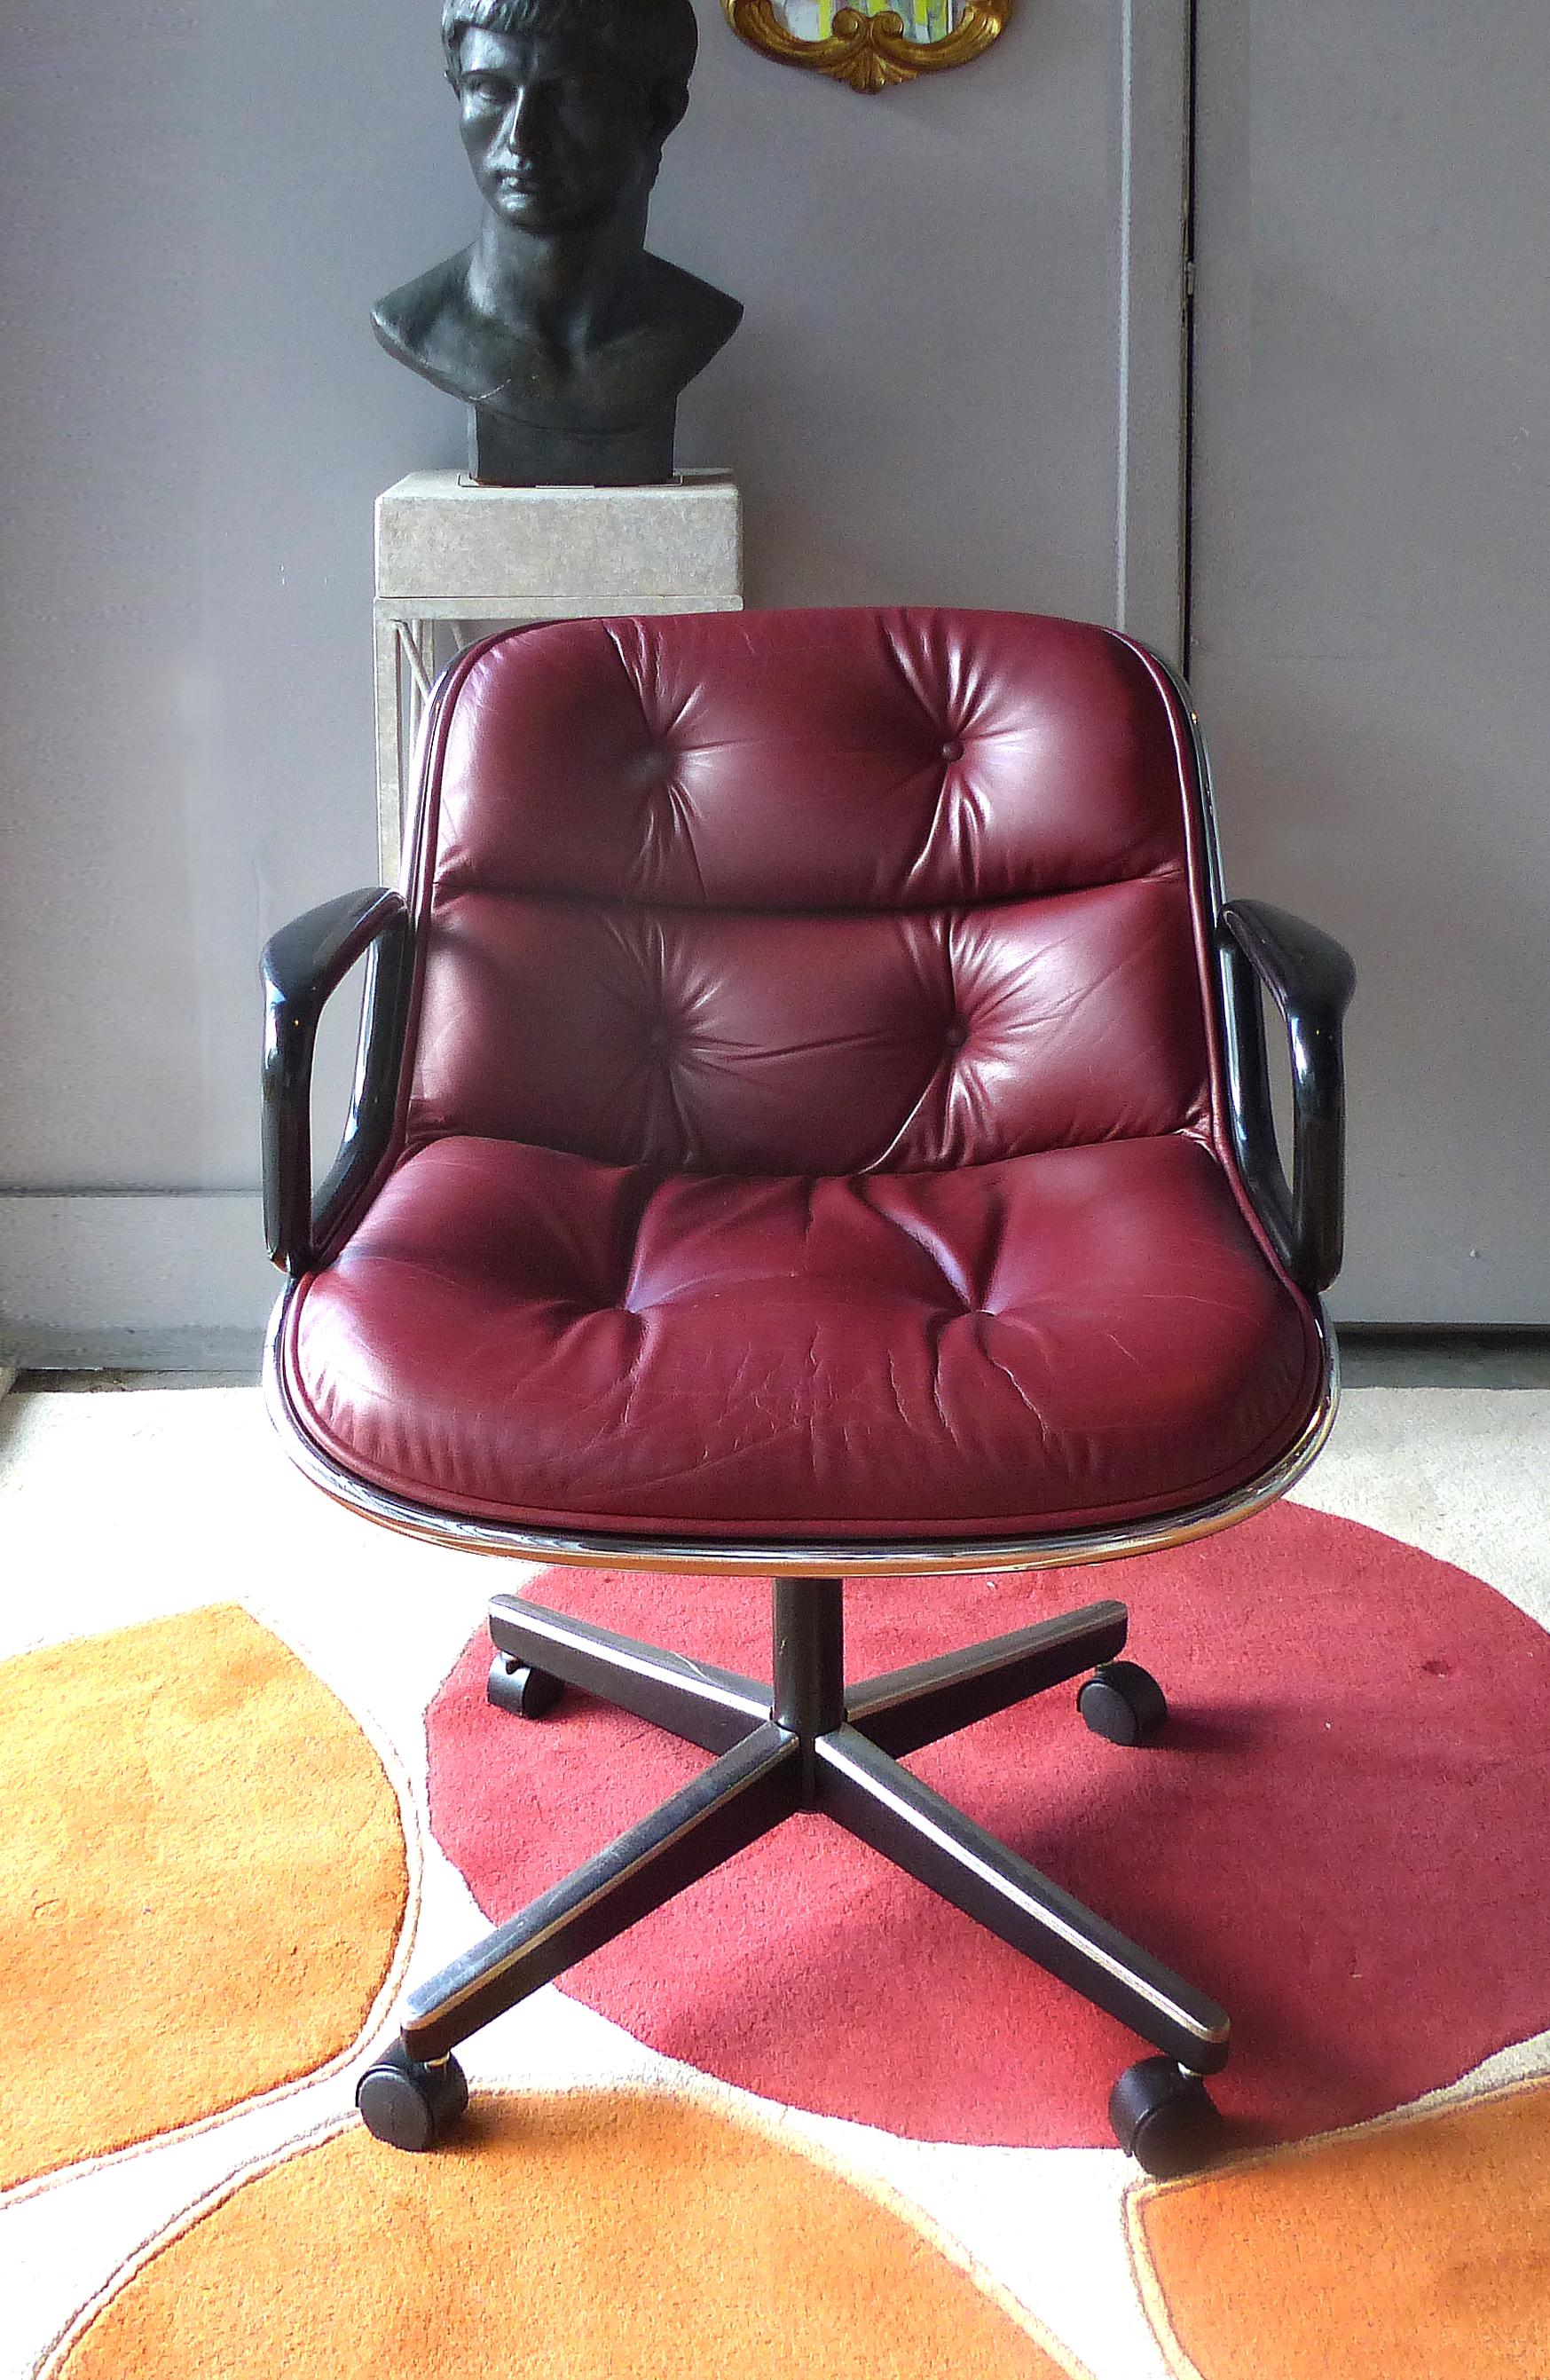 Offered for sale is a pair of iconic Mid-Century Modern executive swivel chairs by Charles Pollock for Knoll International. The chairs are luxuriously upholstered in a rare maroon leather accented in black and chrome. The chairs swivel upon a